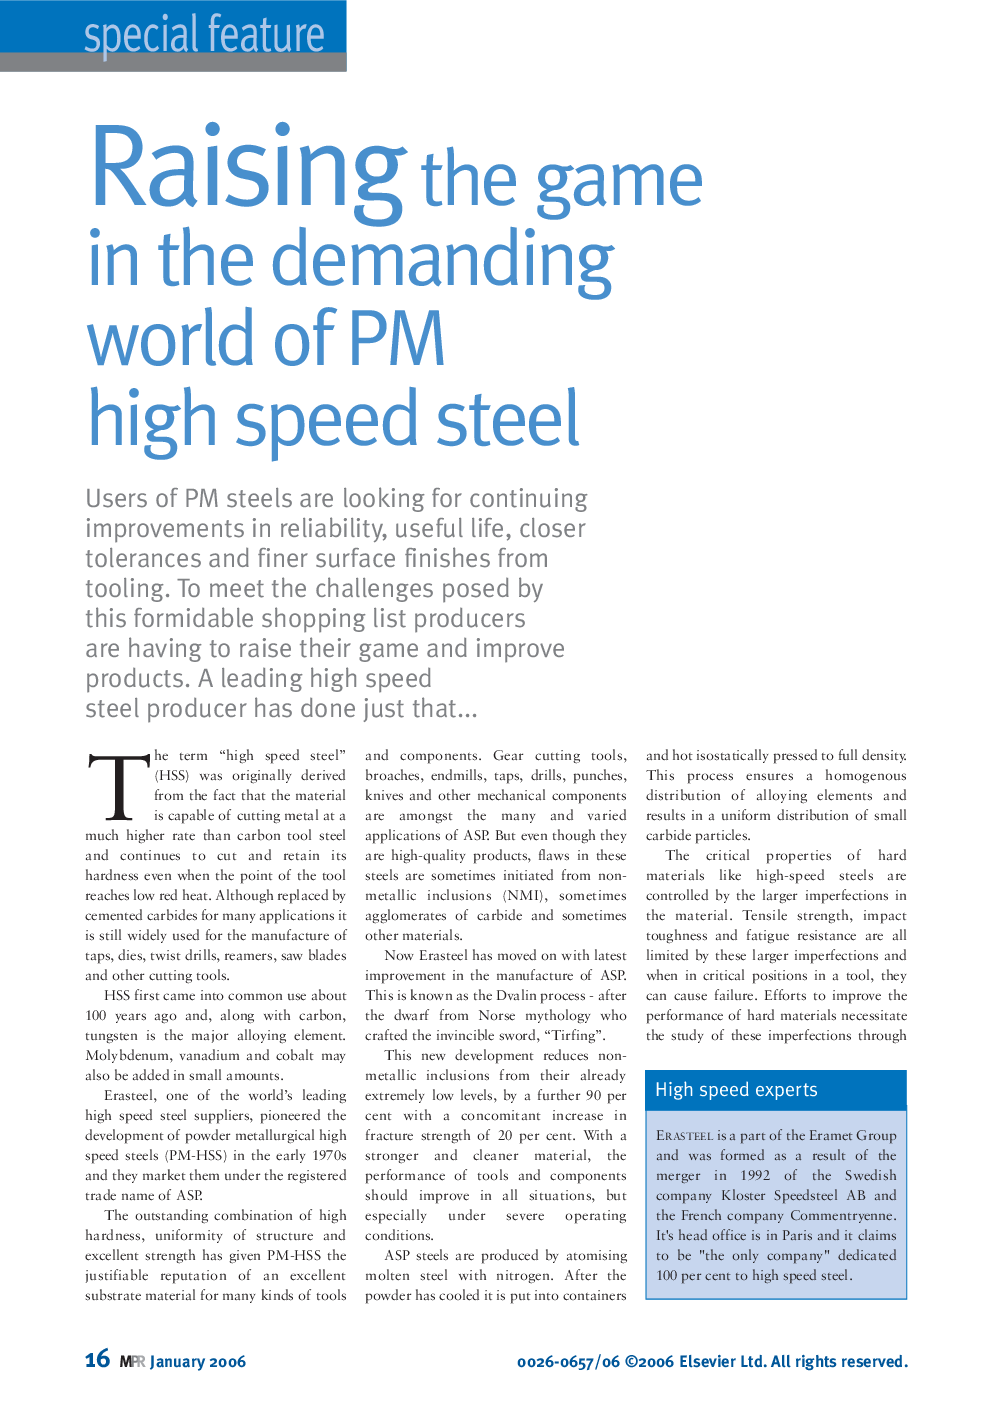 Raising the game in the demanding world of PM high speed steel